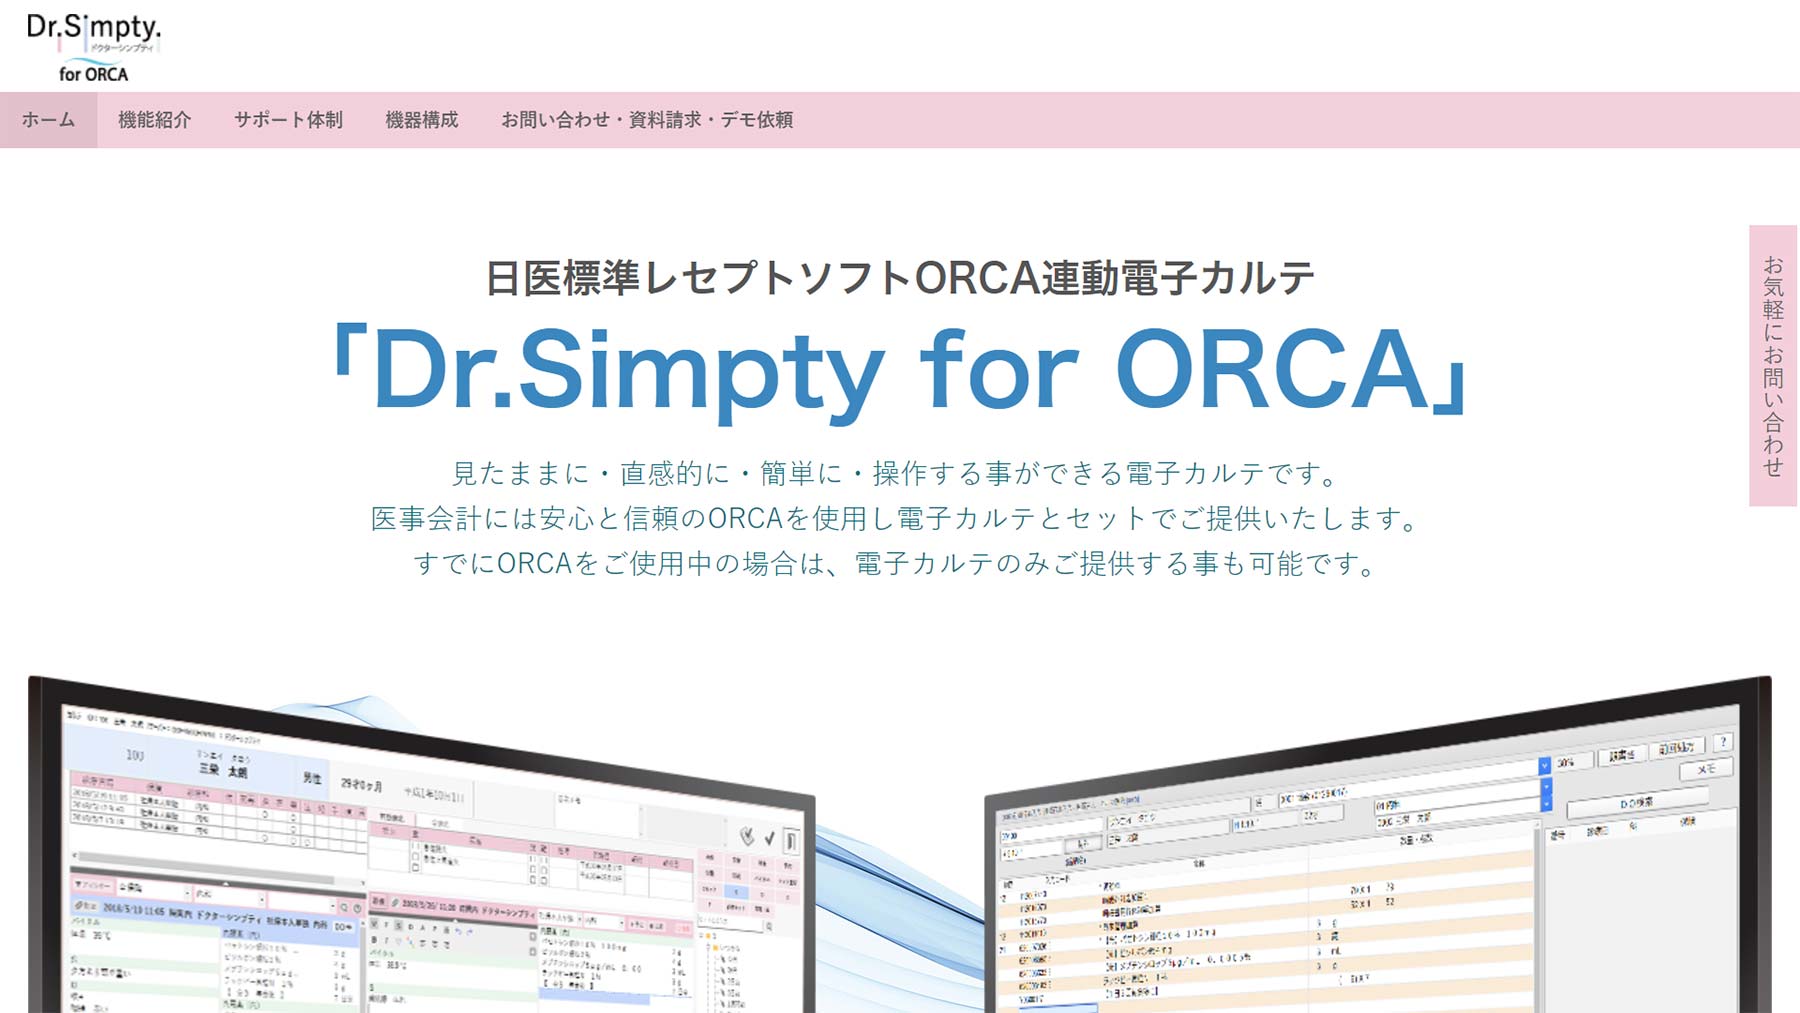 Dr.Simpty for ORCA公式Webサイト